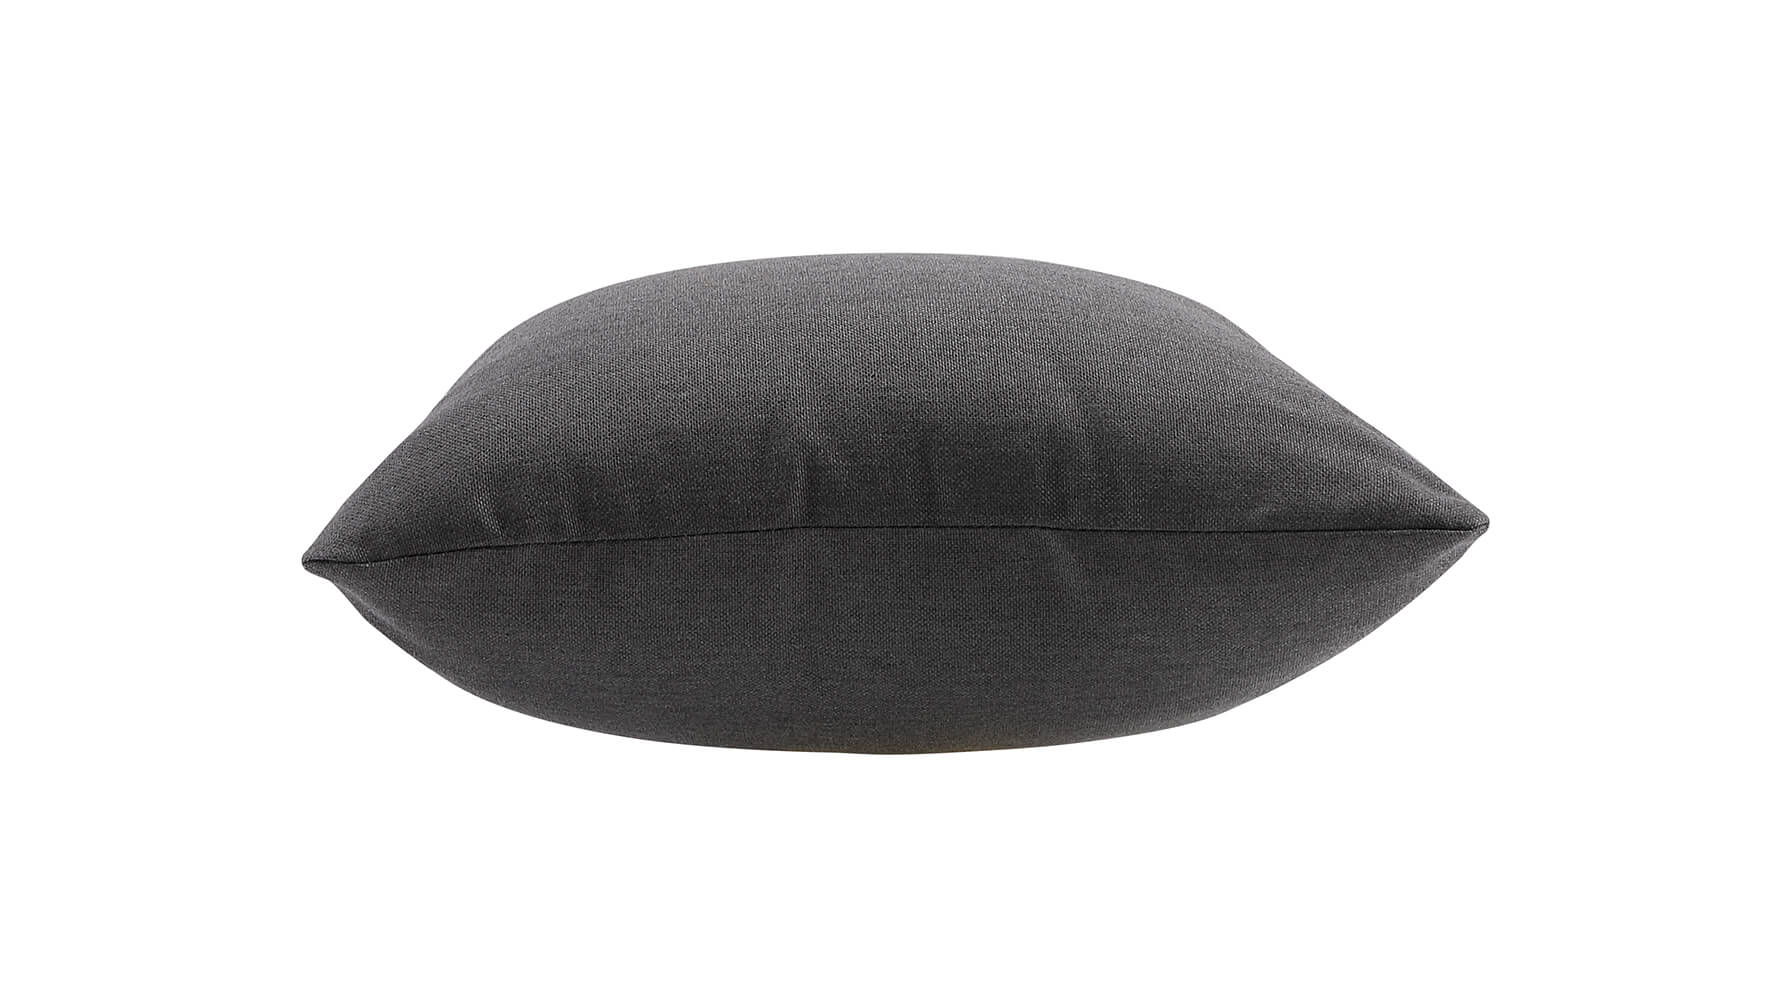 Gather Outdoor Pillow, Night - Image 3